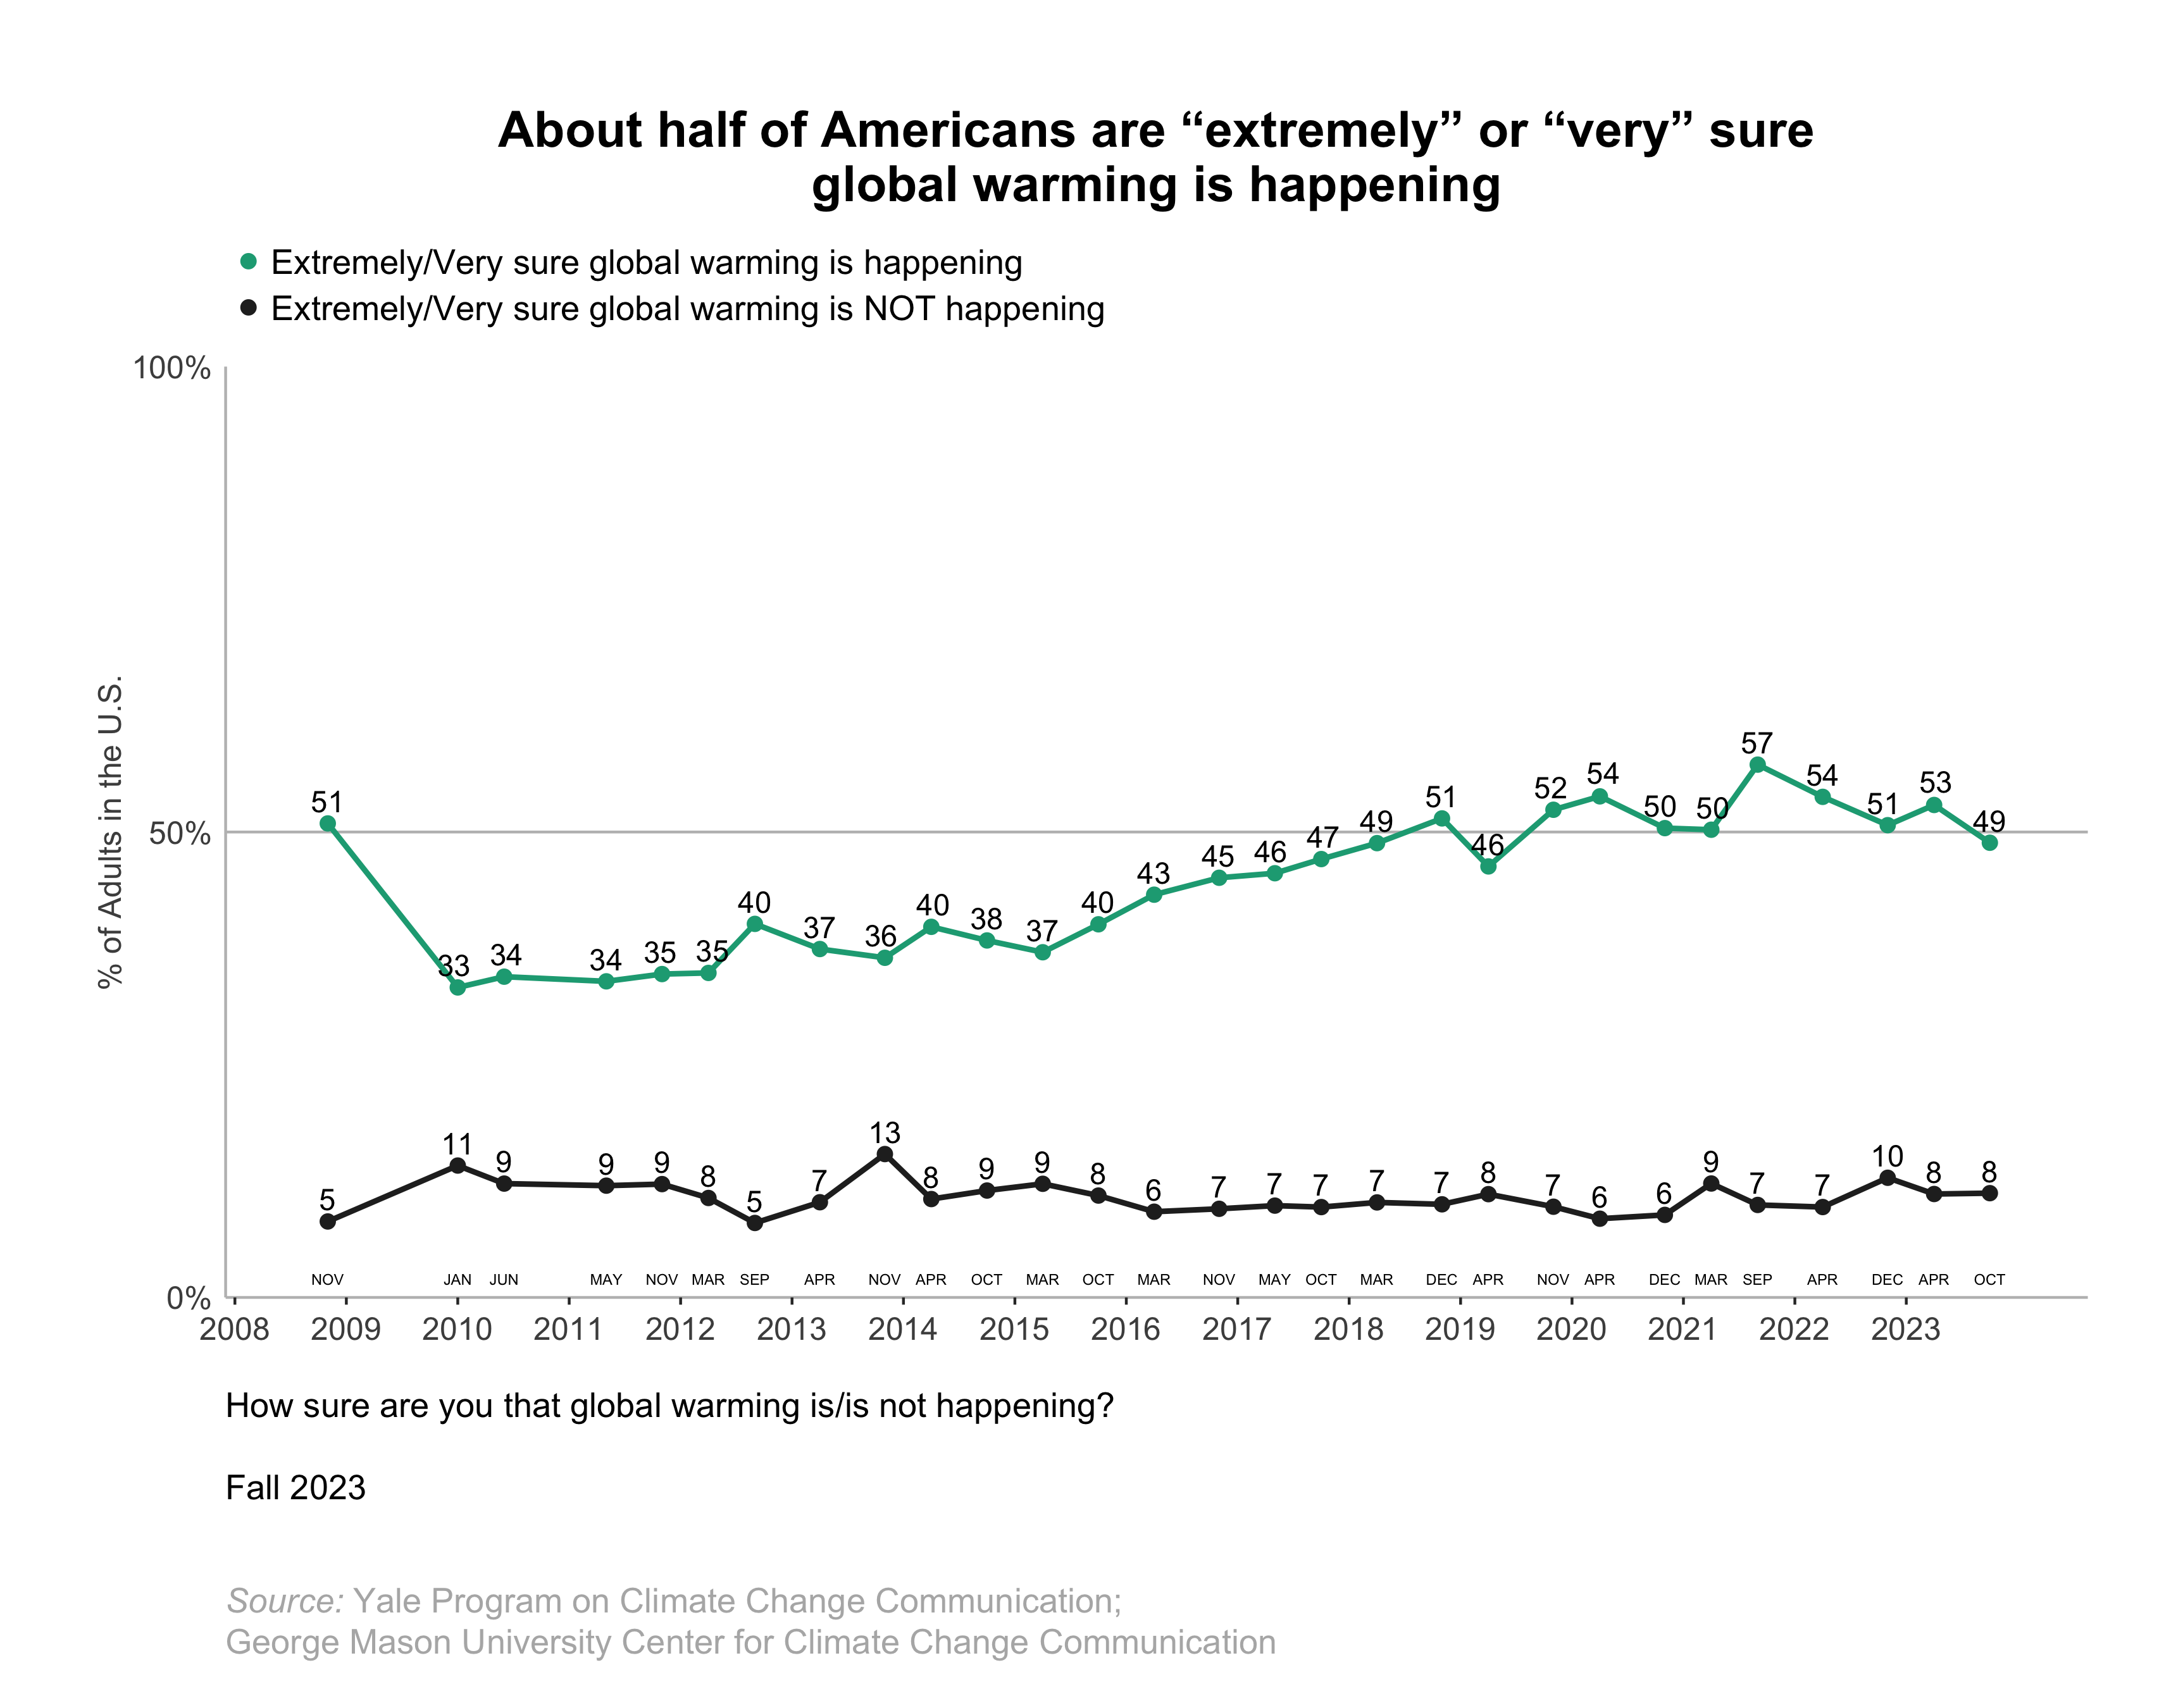 These line graphs show the percentage of Americans over time since 2008 who are “extremely” or “very” sure global warming is happening or not happening. About half of Americans are “extremely” or “very” sure global warming is happening. Data: Climate Change in the American Mind, Fall 2023. Refer to the data tables in Appendix 1 of the report for all percentages.